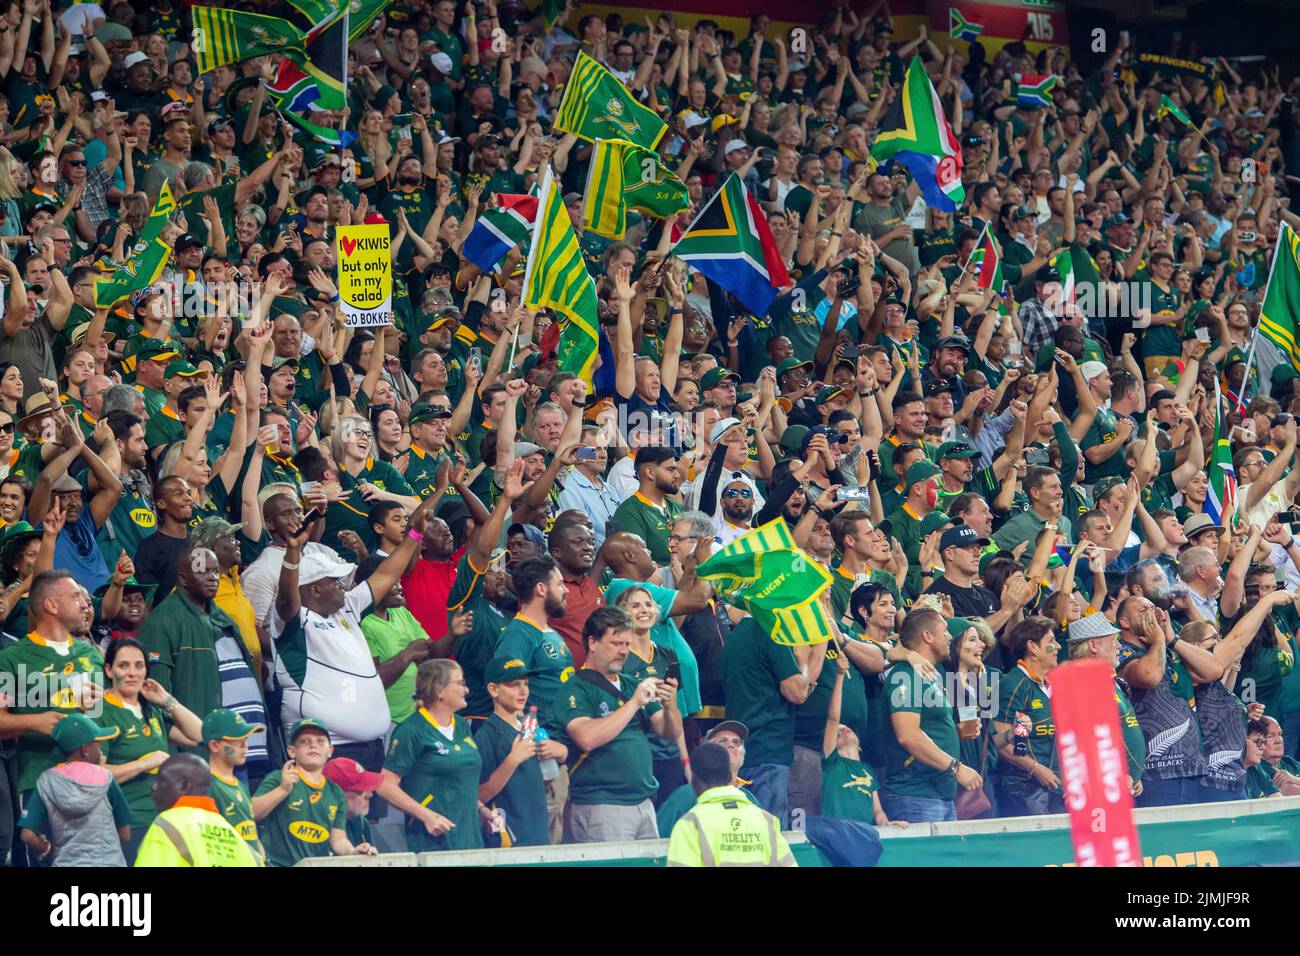 Mbombela, Nelspruit, South Africa. 6th August, 2022. Crowd celebrating a win by the Springboks against the All Blacks at the Castle Lager Rugby Championship in Mbombela, Nelspruit Credit: AfriPics.com/Alamy Live News Stock Photo